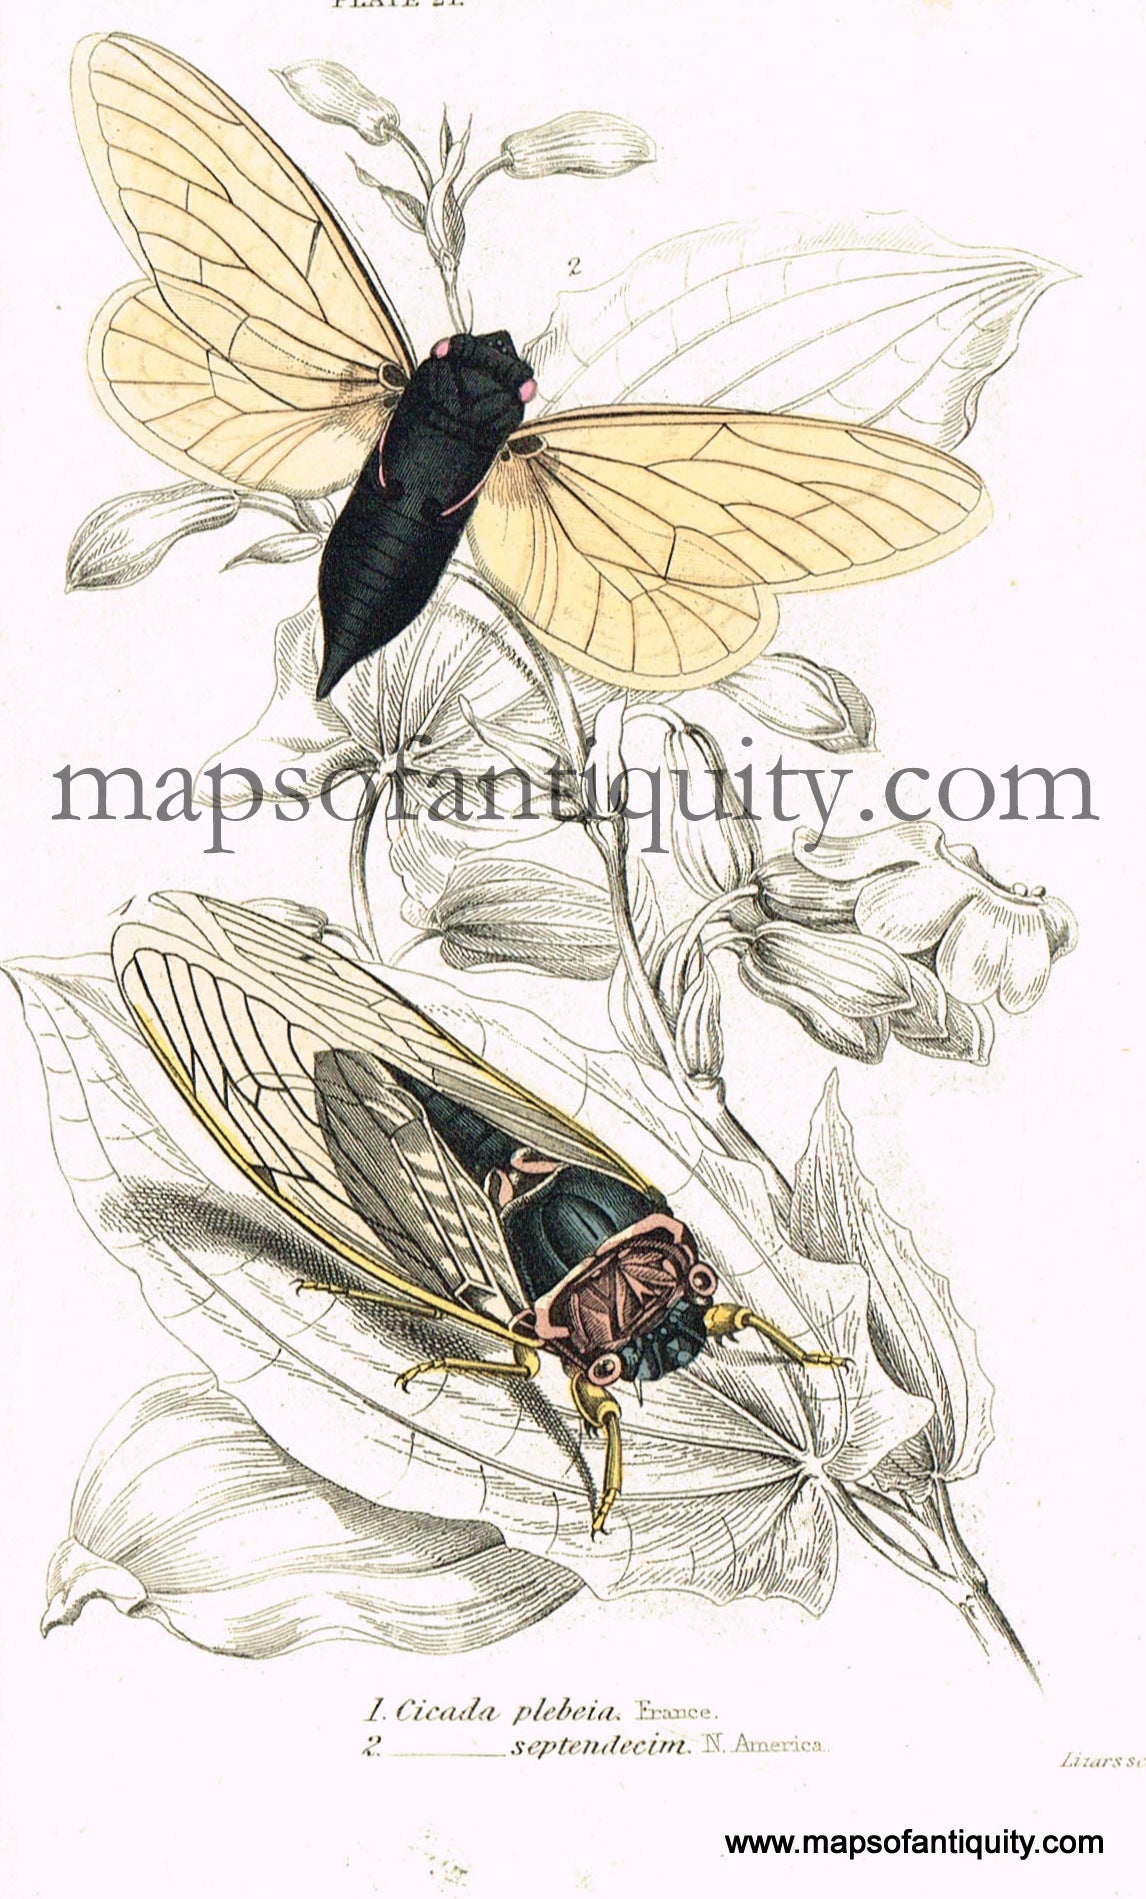 Antique-Hand-Colored-Print-Cicada-plebeia-&-Cicada-septendecim-Antique-Prints-Natural-History-Insects-1840-Duncan-Maps-Of-Antiquity